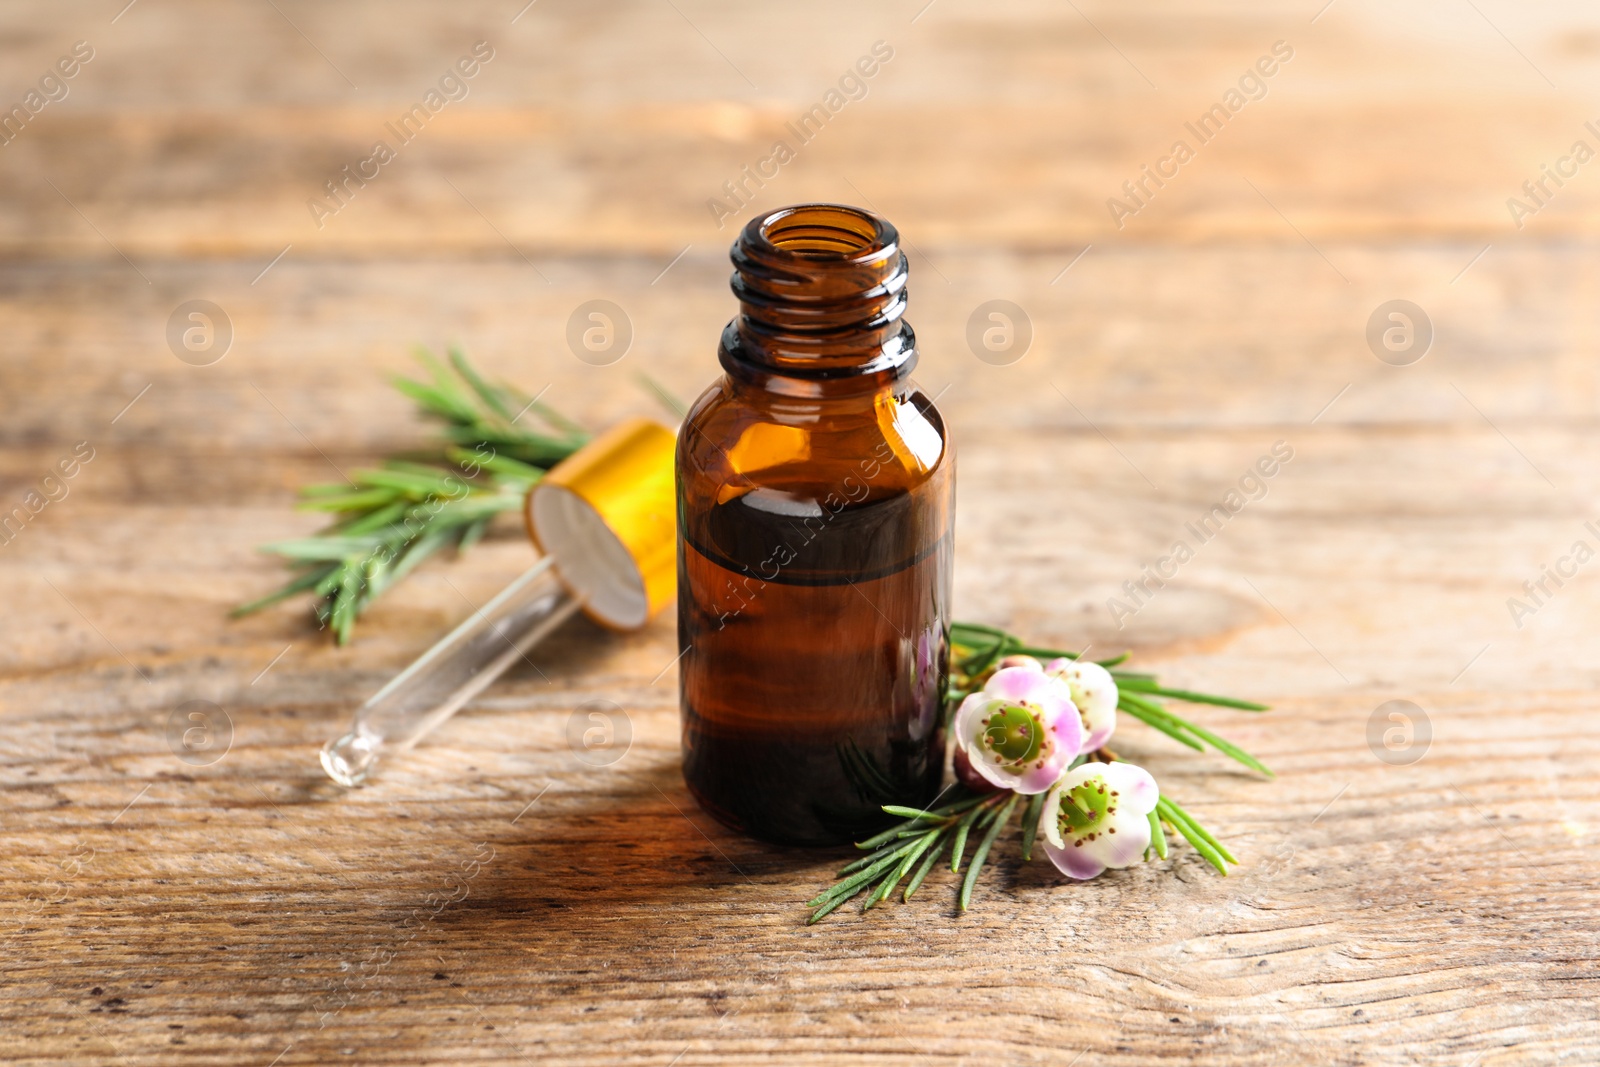 Photo of Bottle of natural tea tree oil and plant on table